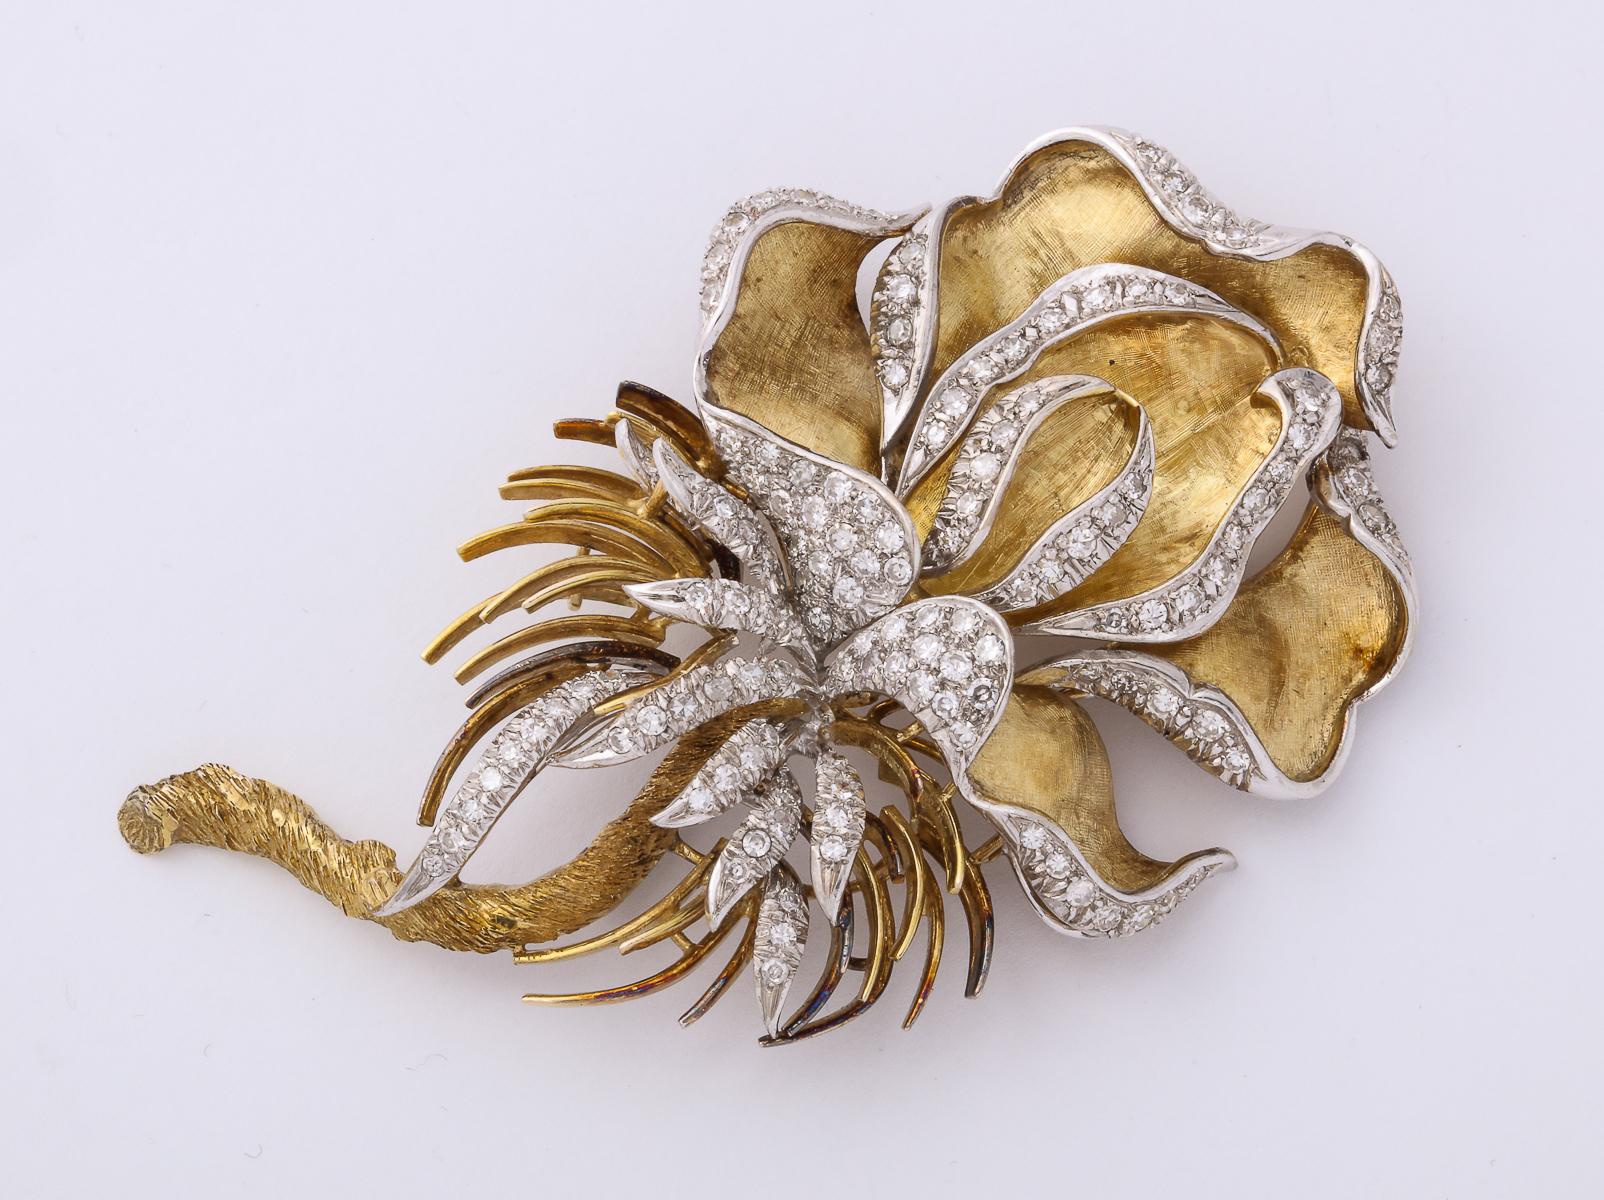 One Ladies Large 18kt Florentine Engraved Gold  Figural Orchid Brooch Designed With Approximately 3 Carats Of Full Cut Diamonds. Created In Italy In The 1960's.